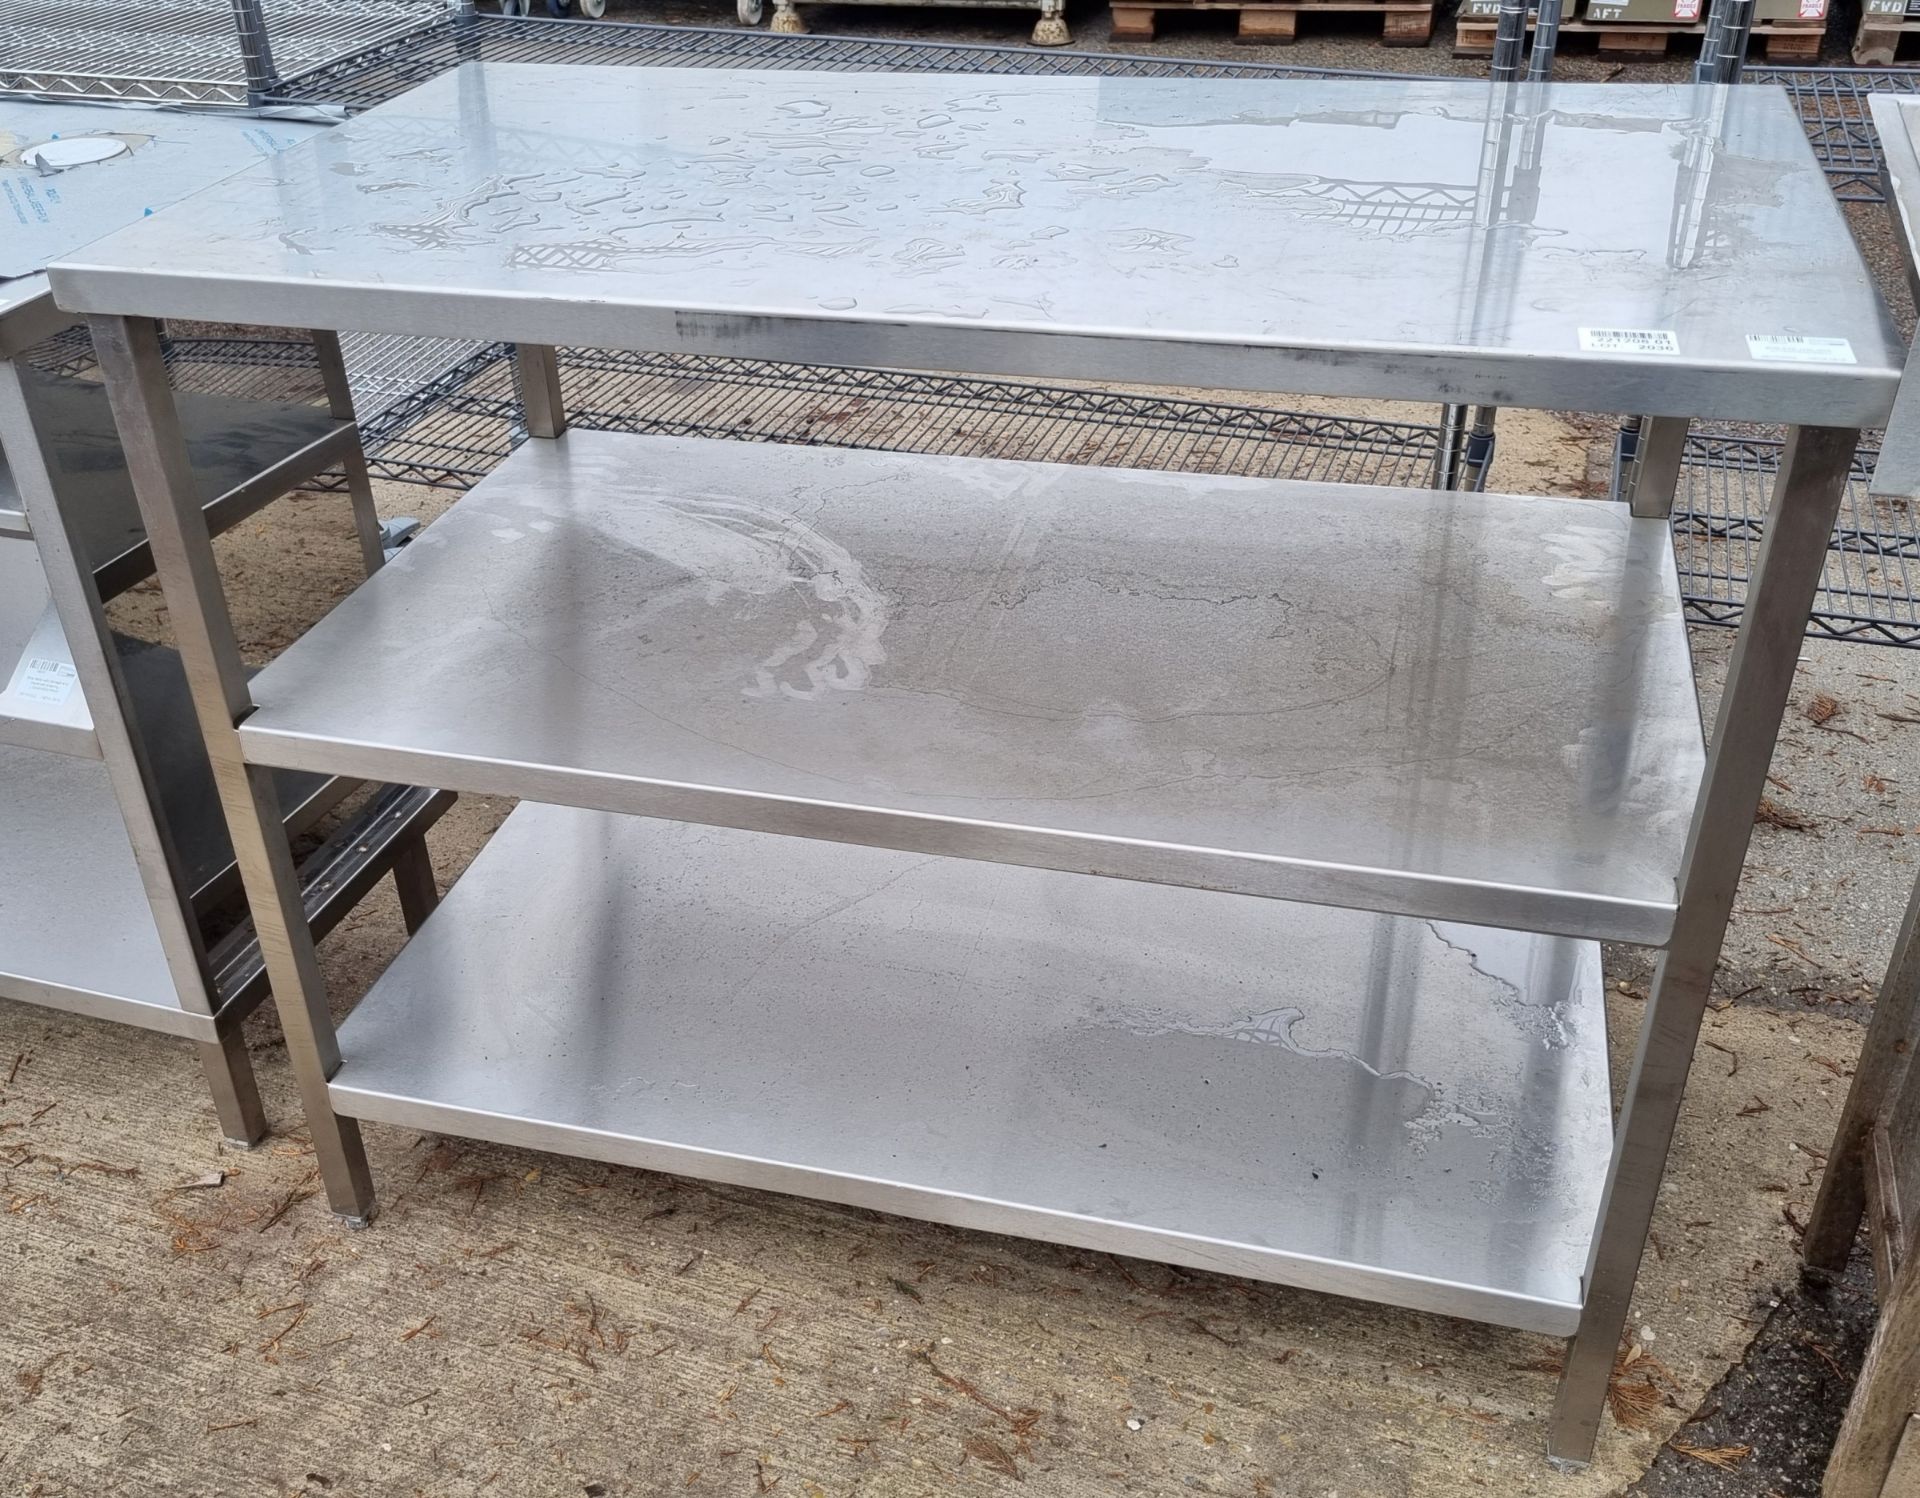 Stainless Steel 3-tier prep table - L 115 x W 64 x H 92cm